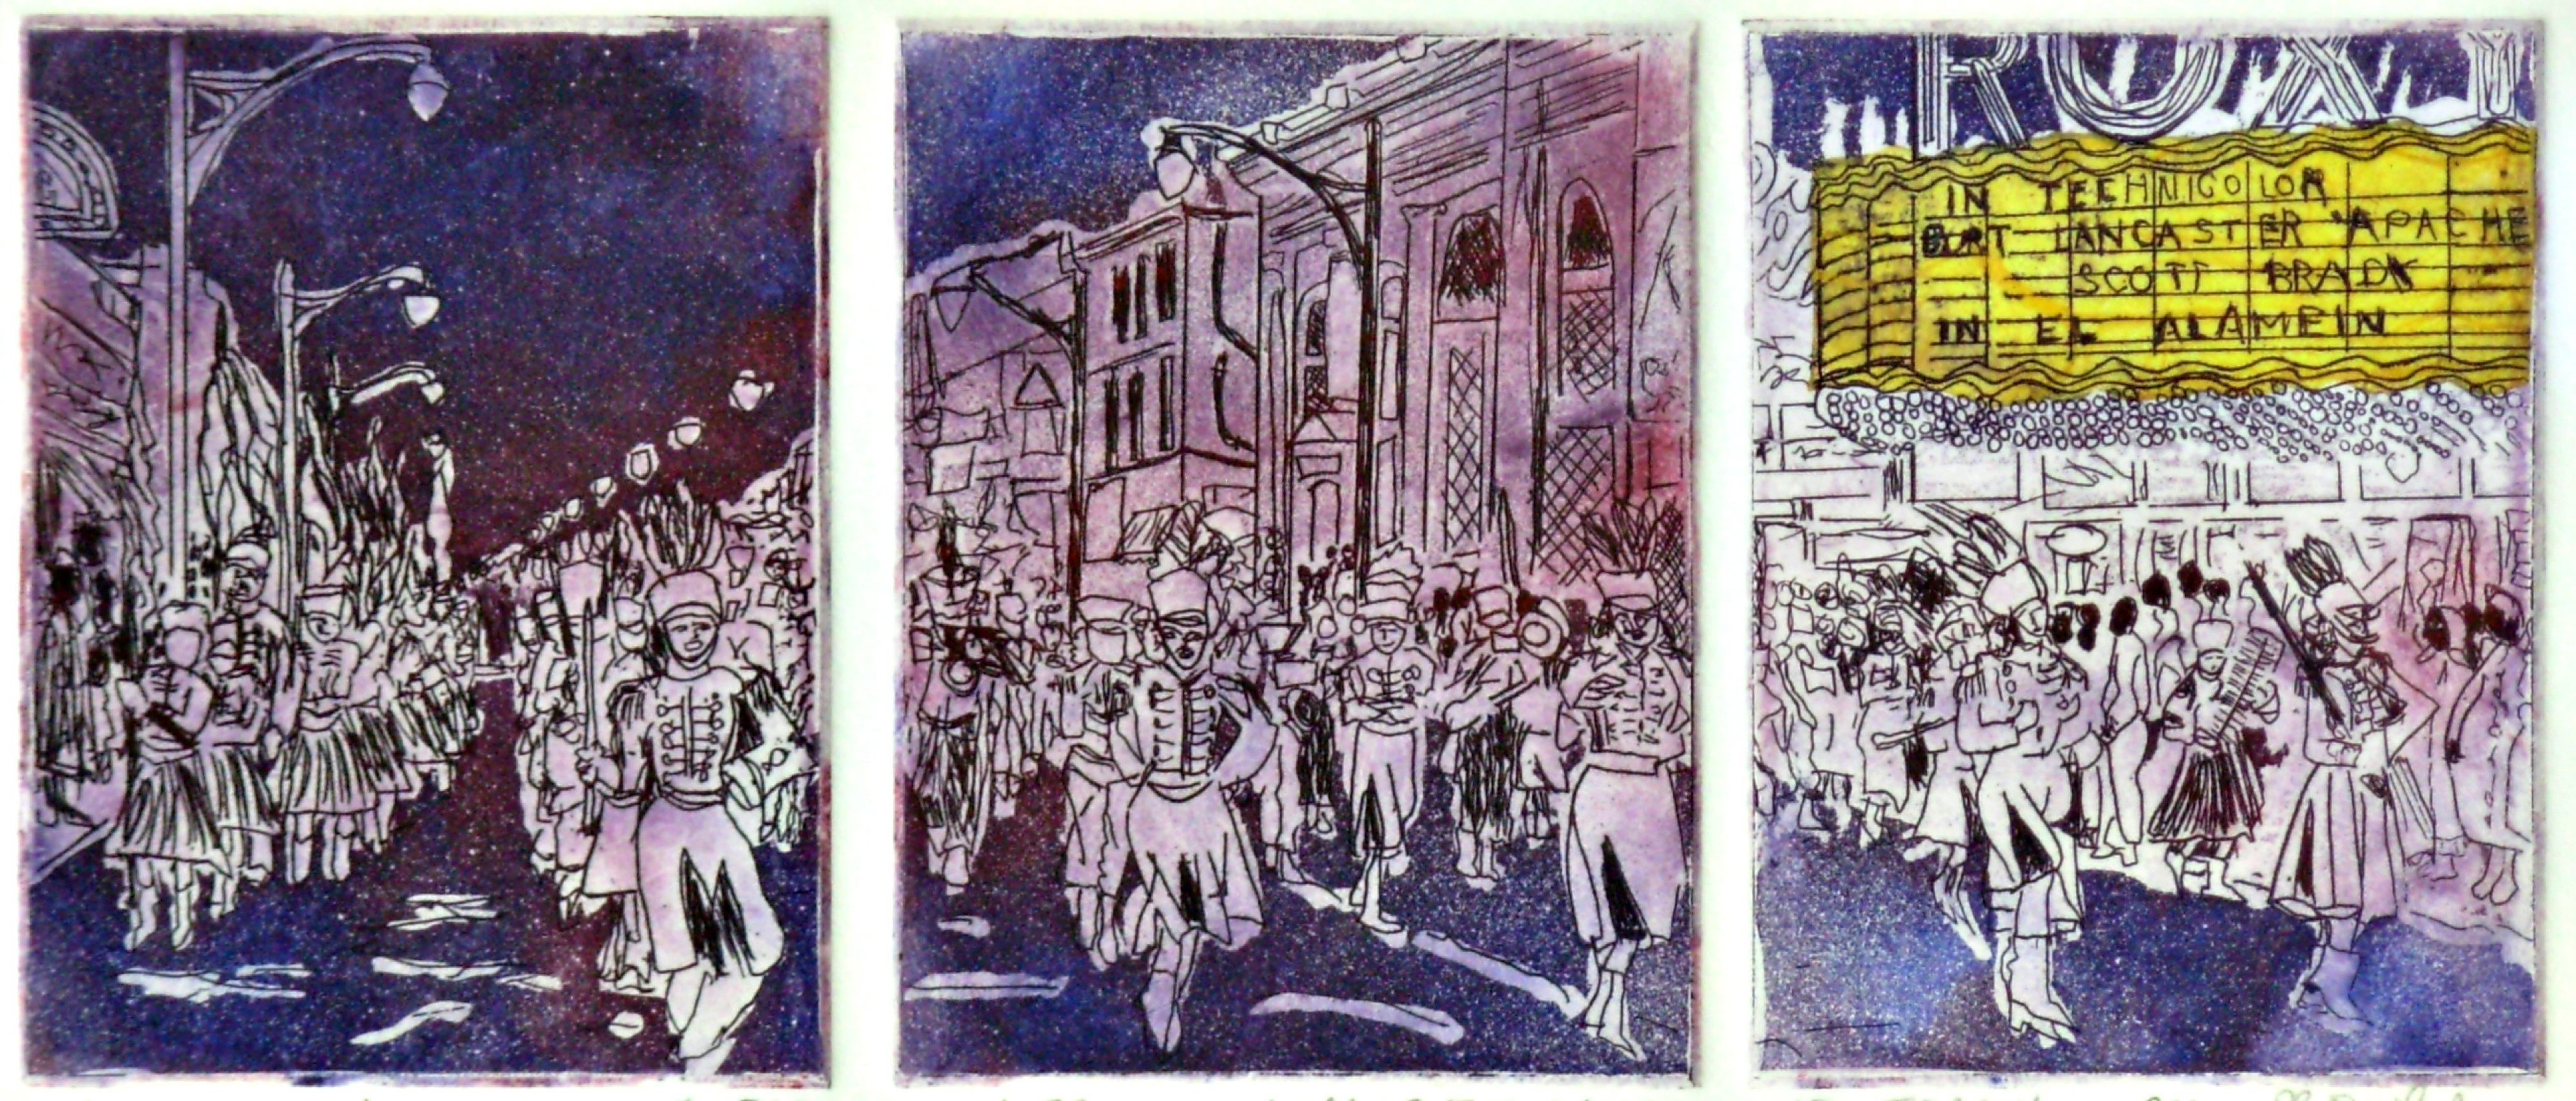 Jerry  Di Falco: 'A 1955 PARADE CAMDEN NEW JERSEY', 2015 Etching, Circus. Please note that this etching is shipped to the buyer without a frame or mat. This keeps the price low and allows the collector a range of choice in framing. For shipment, a sturdy cardboard box is employed. The etching is first wrapped in two layers of acid free glassine ...